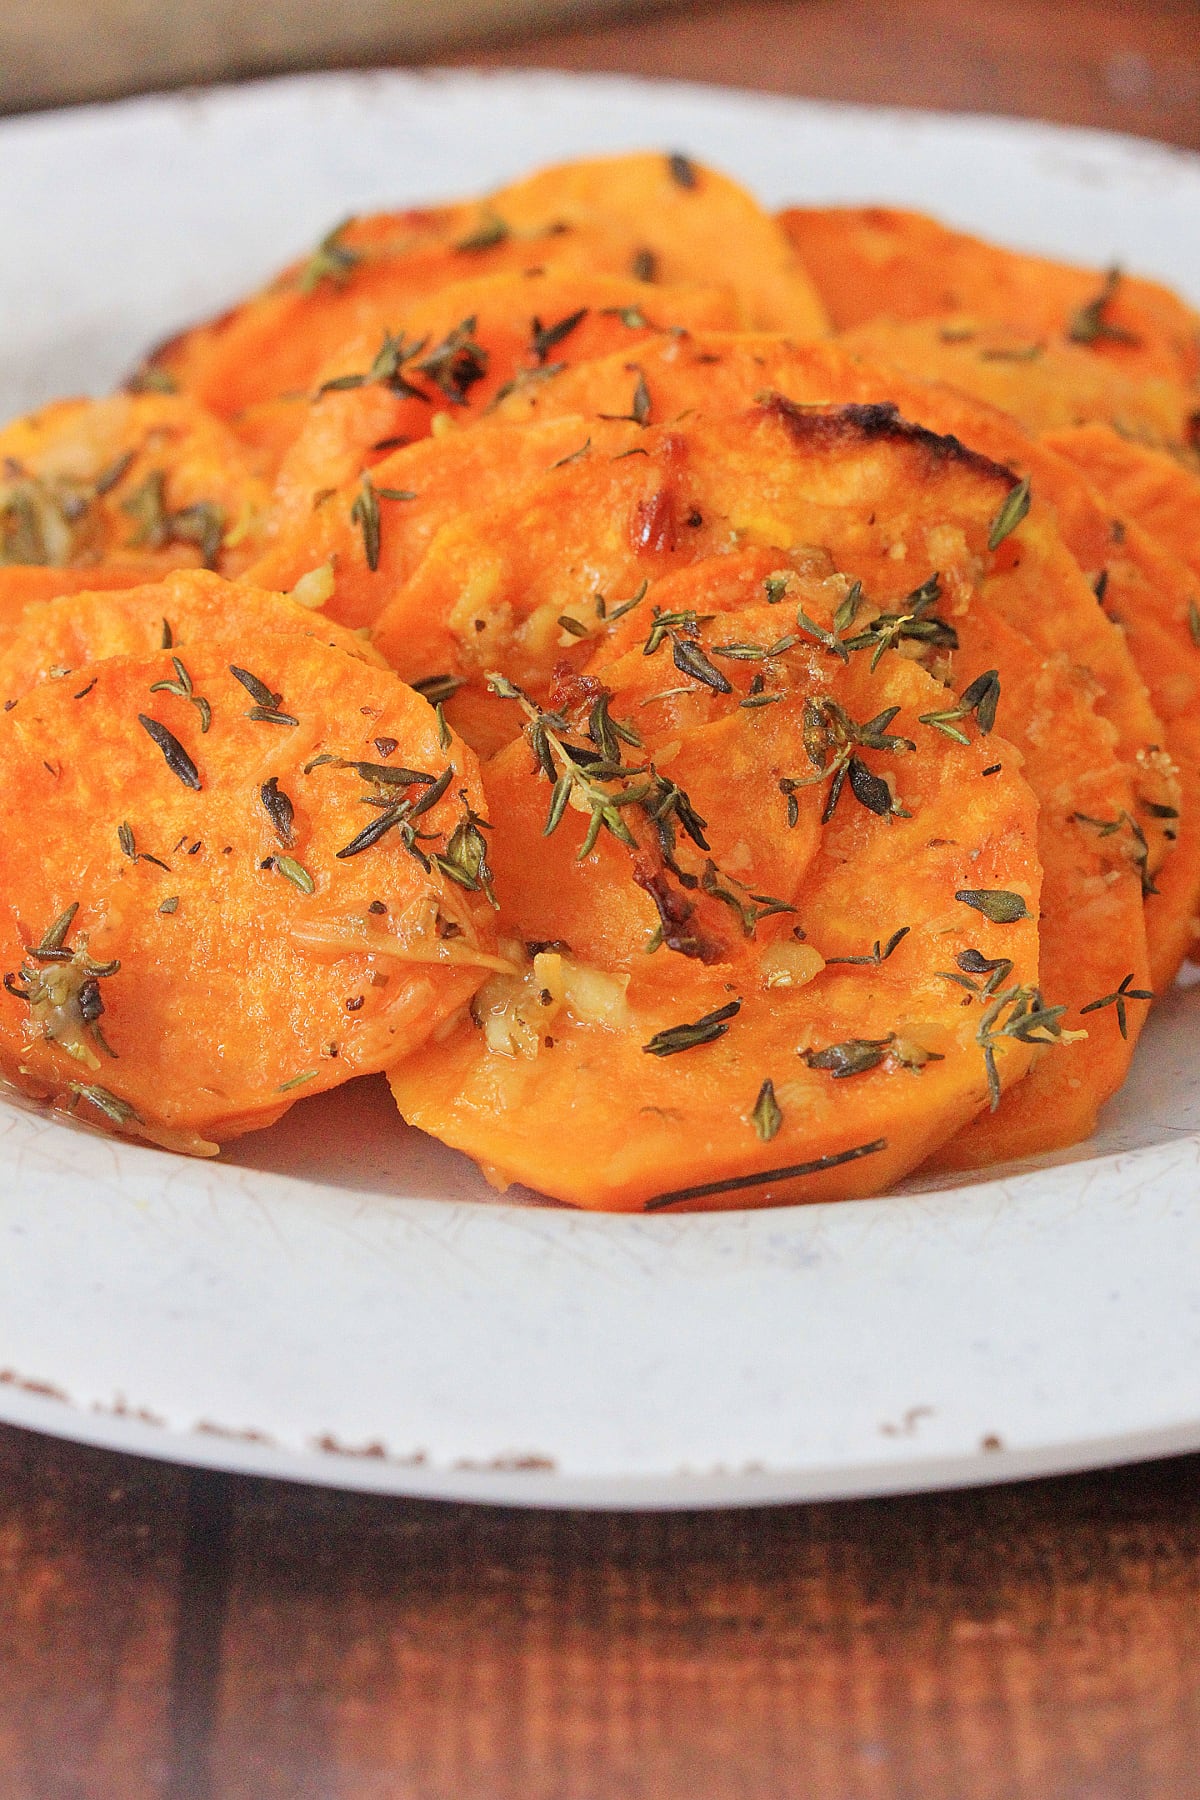 Roasted sweet potato slices in white dish